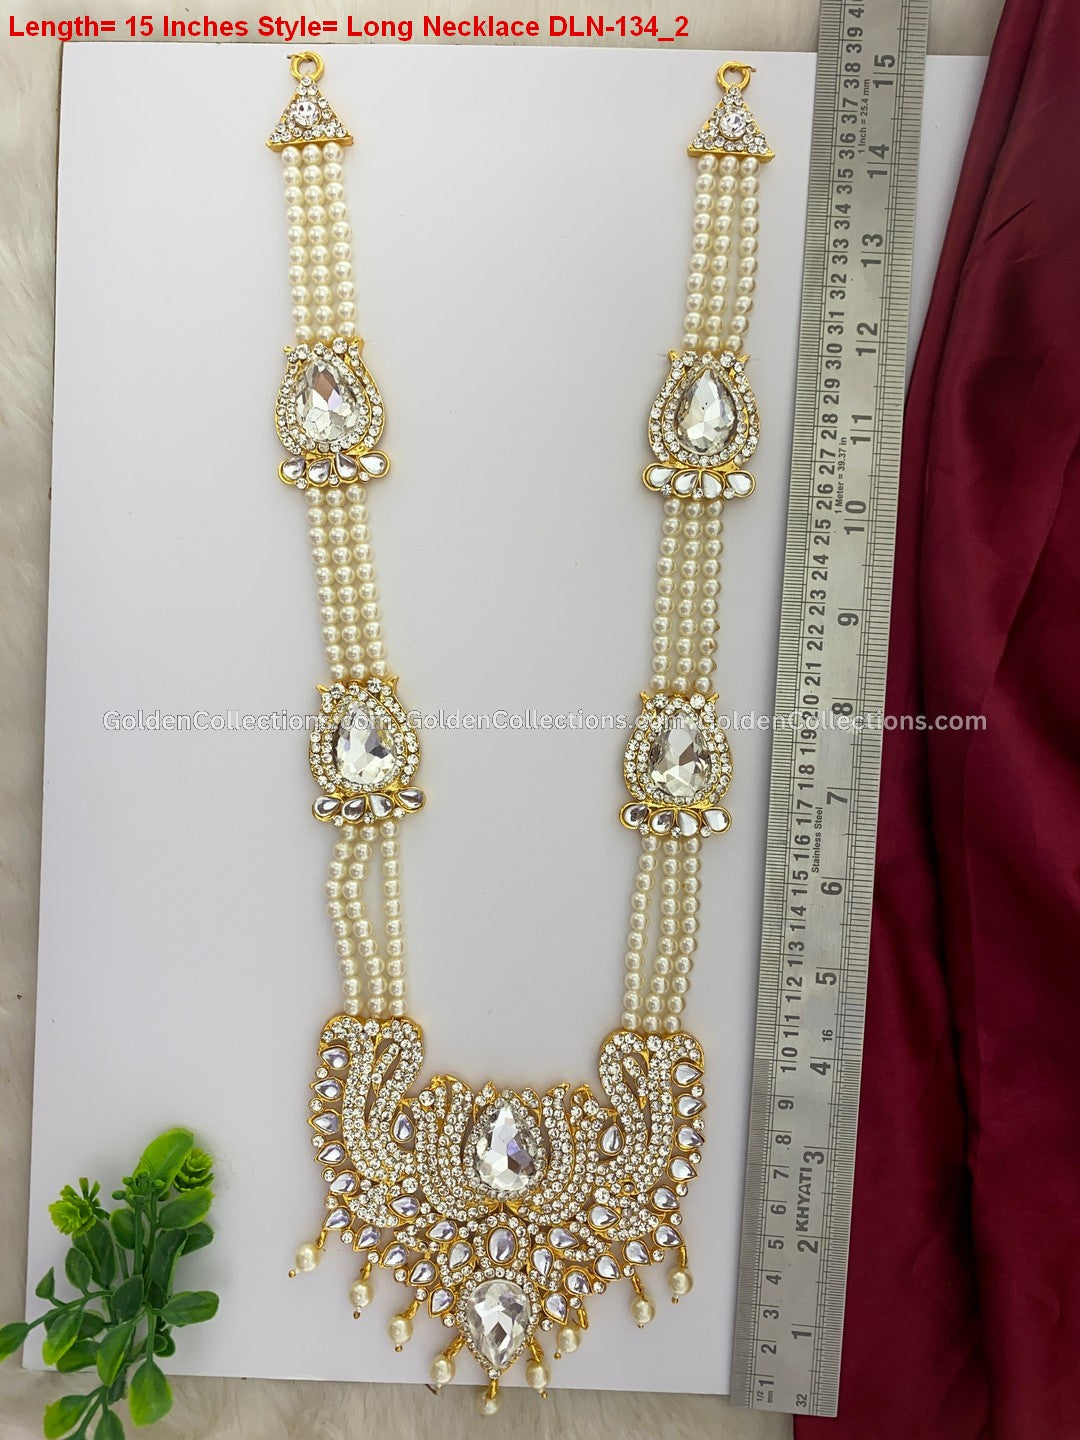 GoldenCollections Temple Deity Long Necklace - DLN-134 2